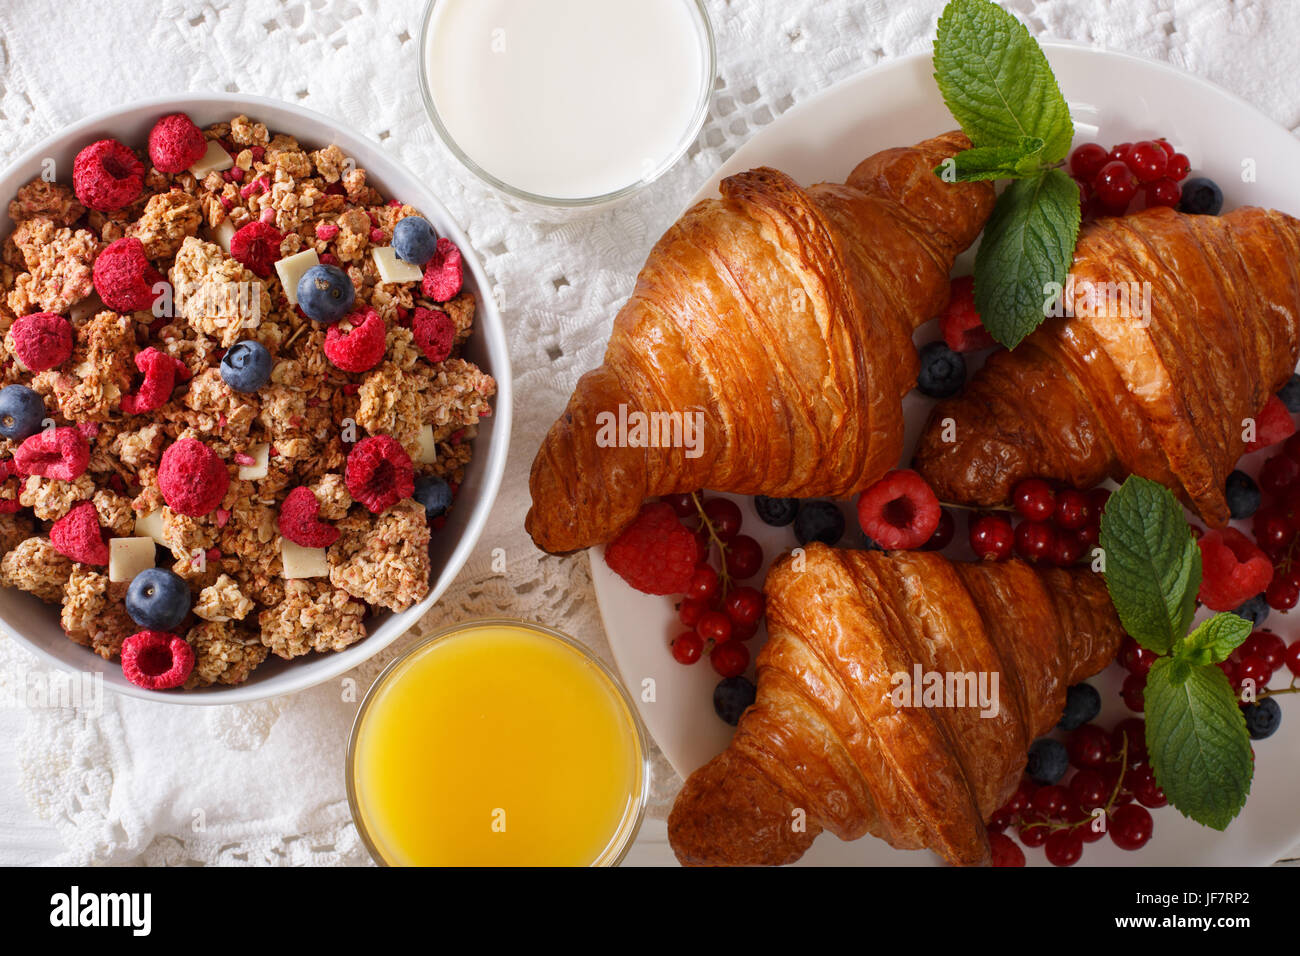 Healthy food: granola, croissants, fresh berries, milk and orange juice close-up on the table. horizontal view from above Stock Photo